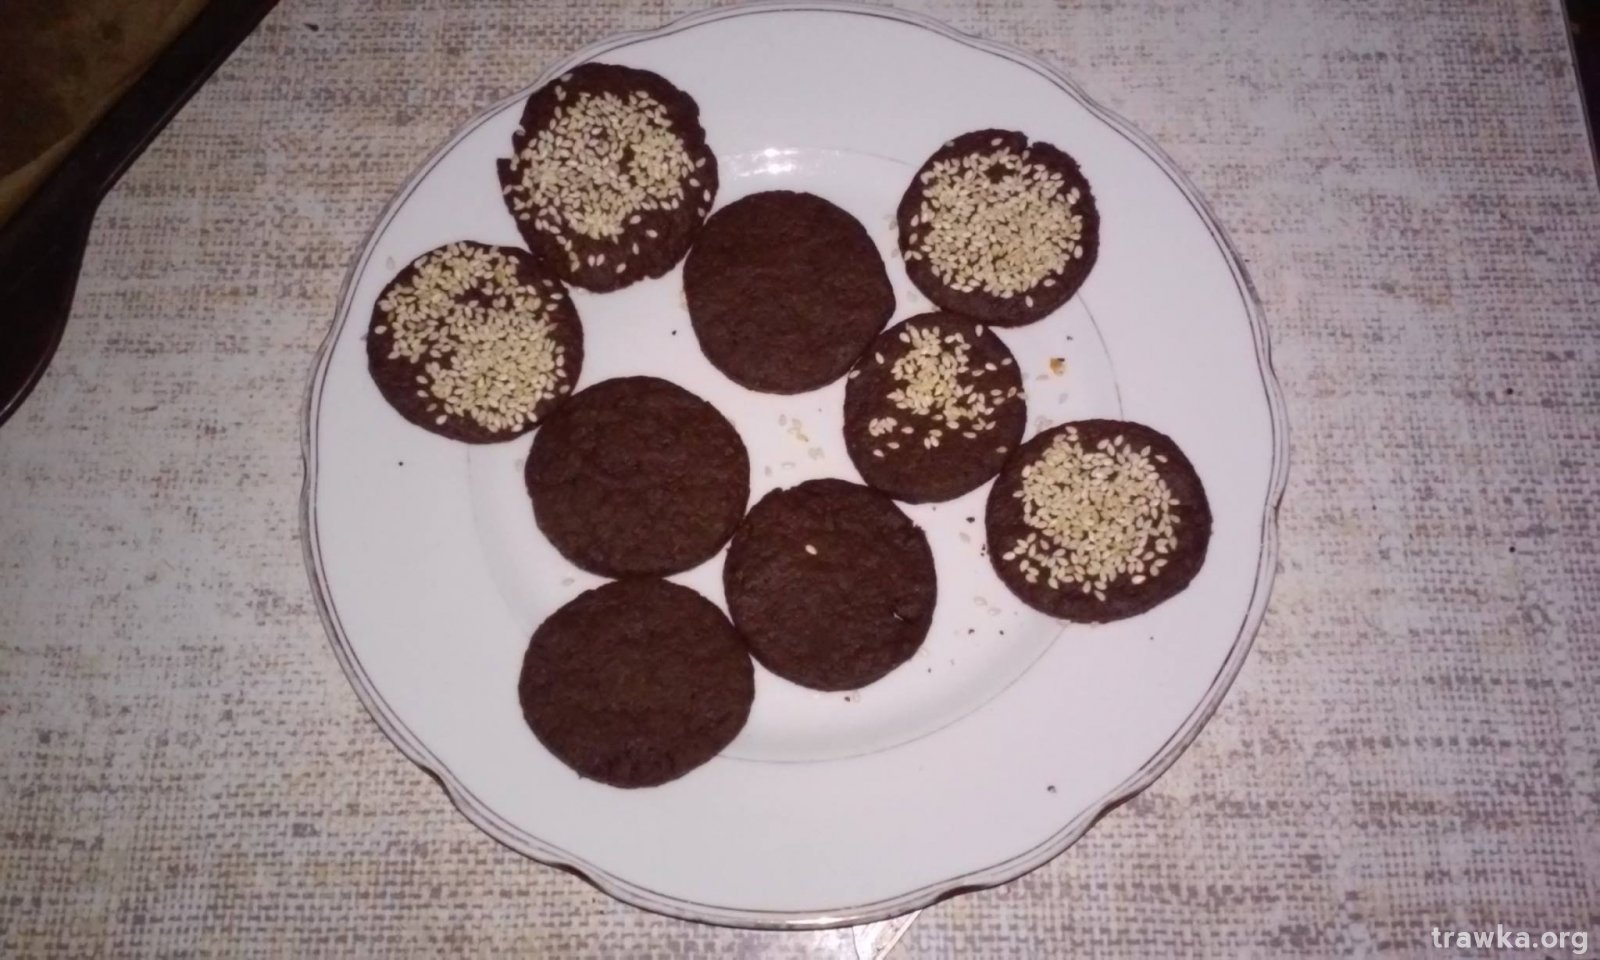 Chocolate Cookies by incognito